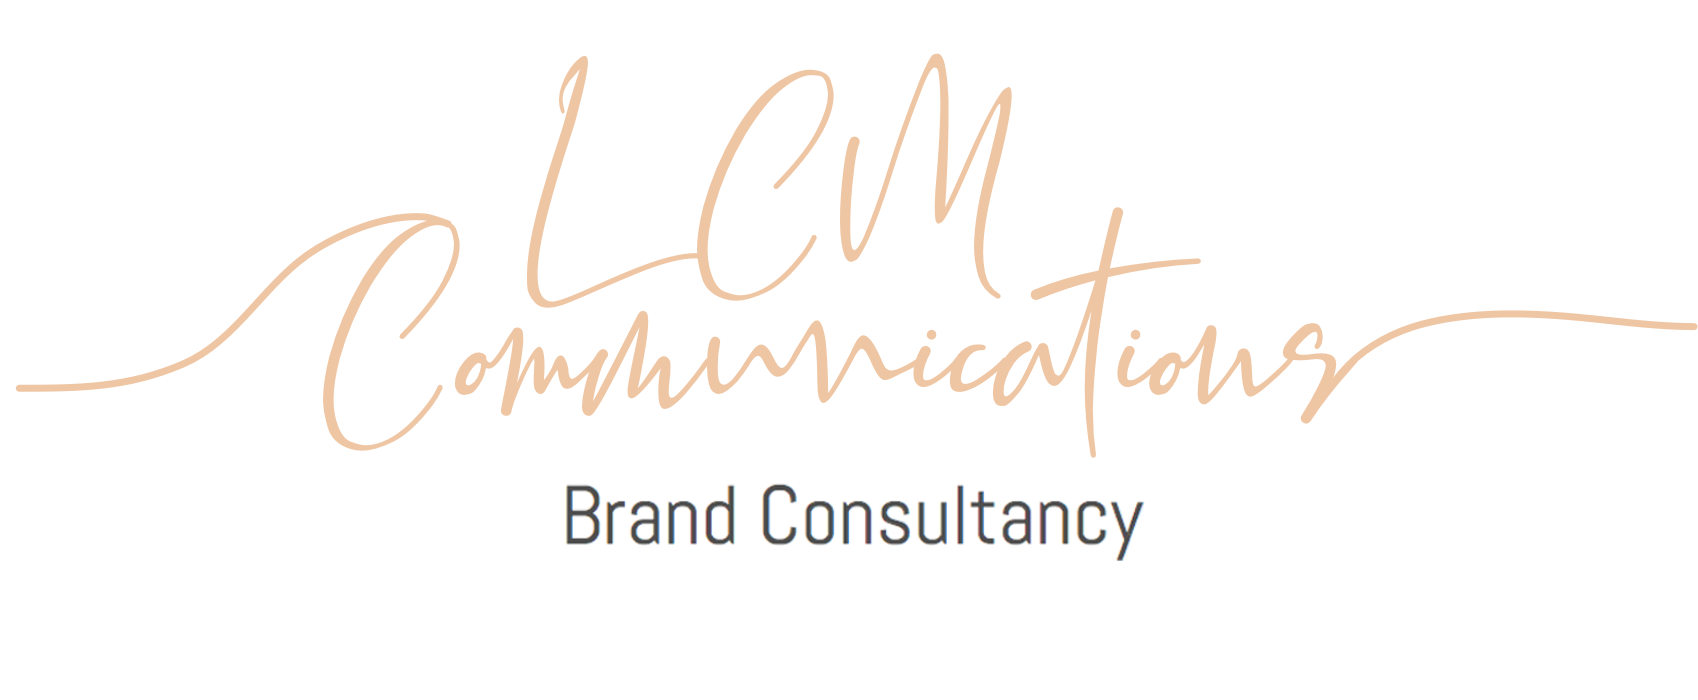 LCM Communications - Brand Consultancy